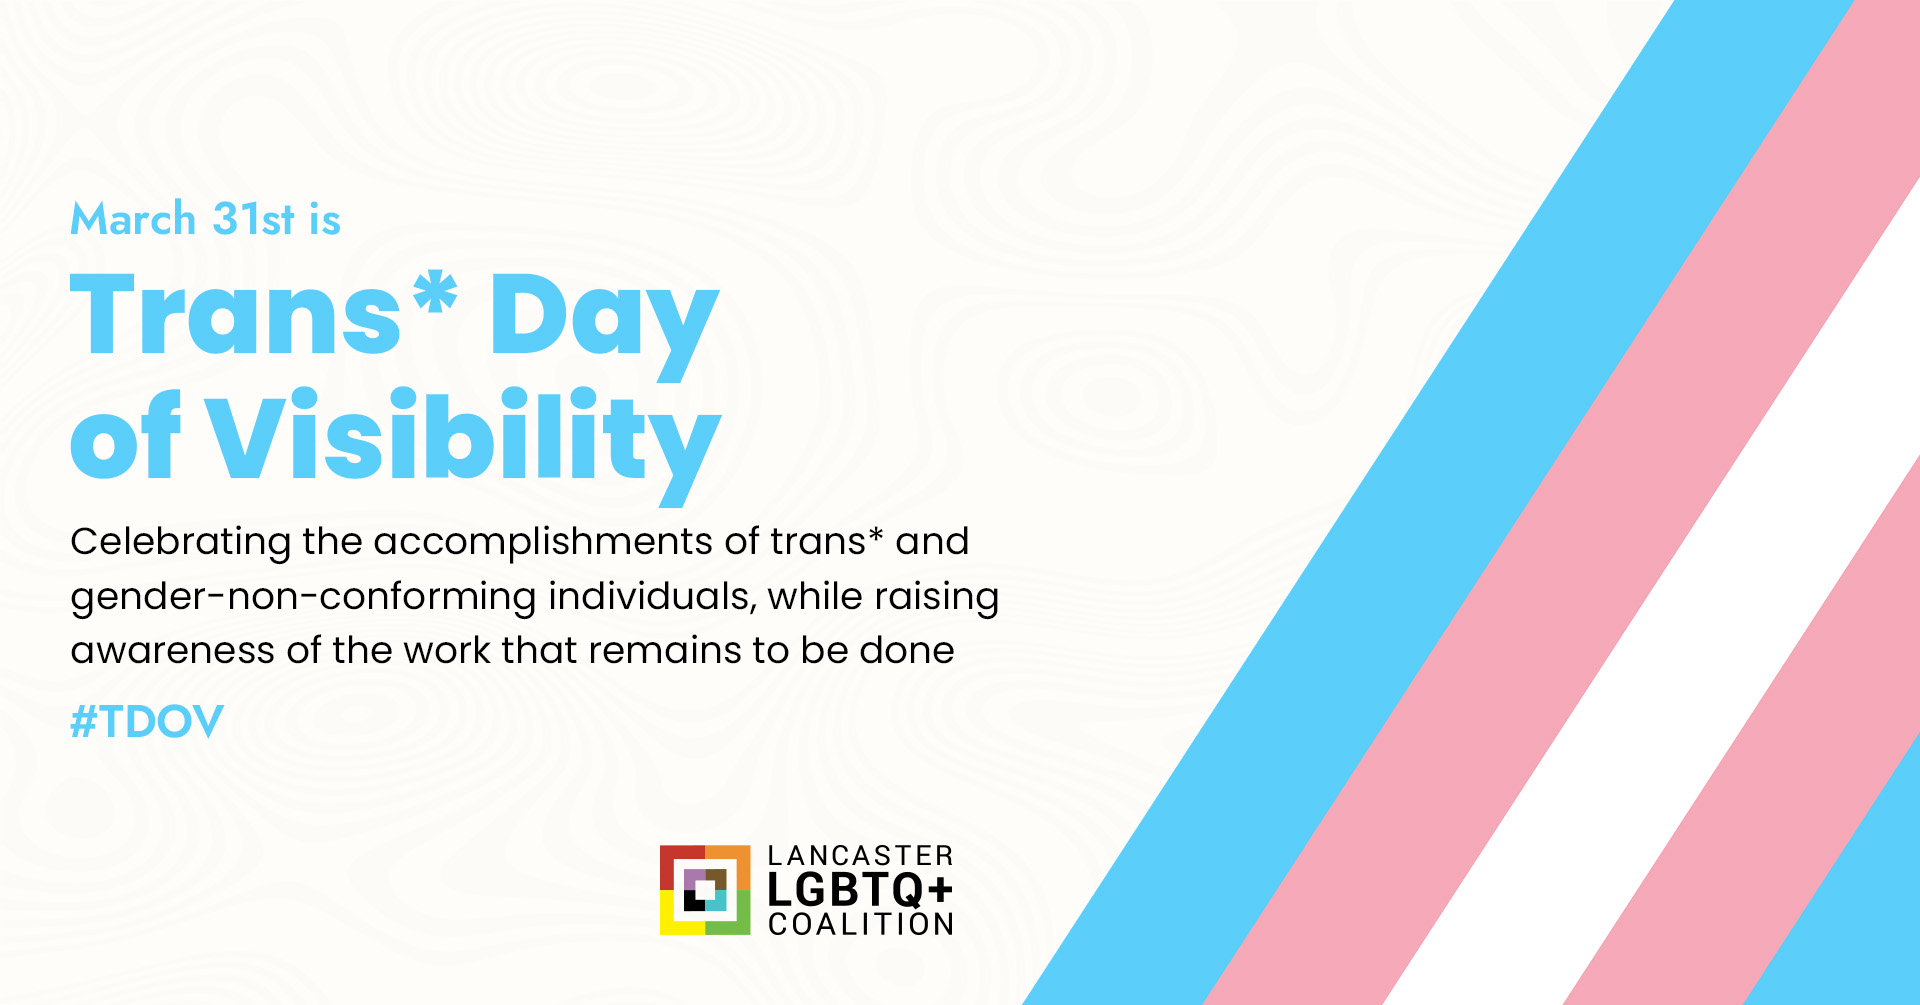 Trans Day of Visibility is March 31st